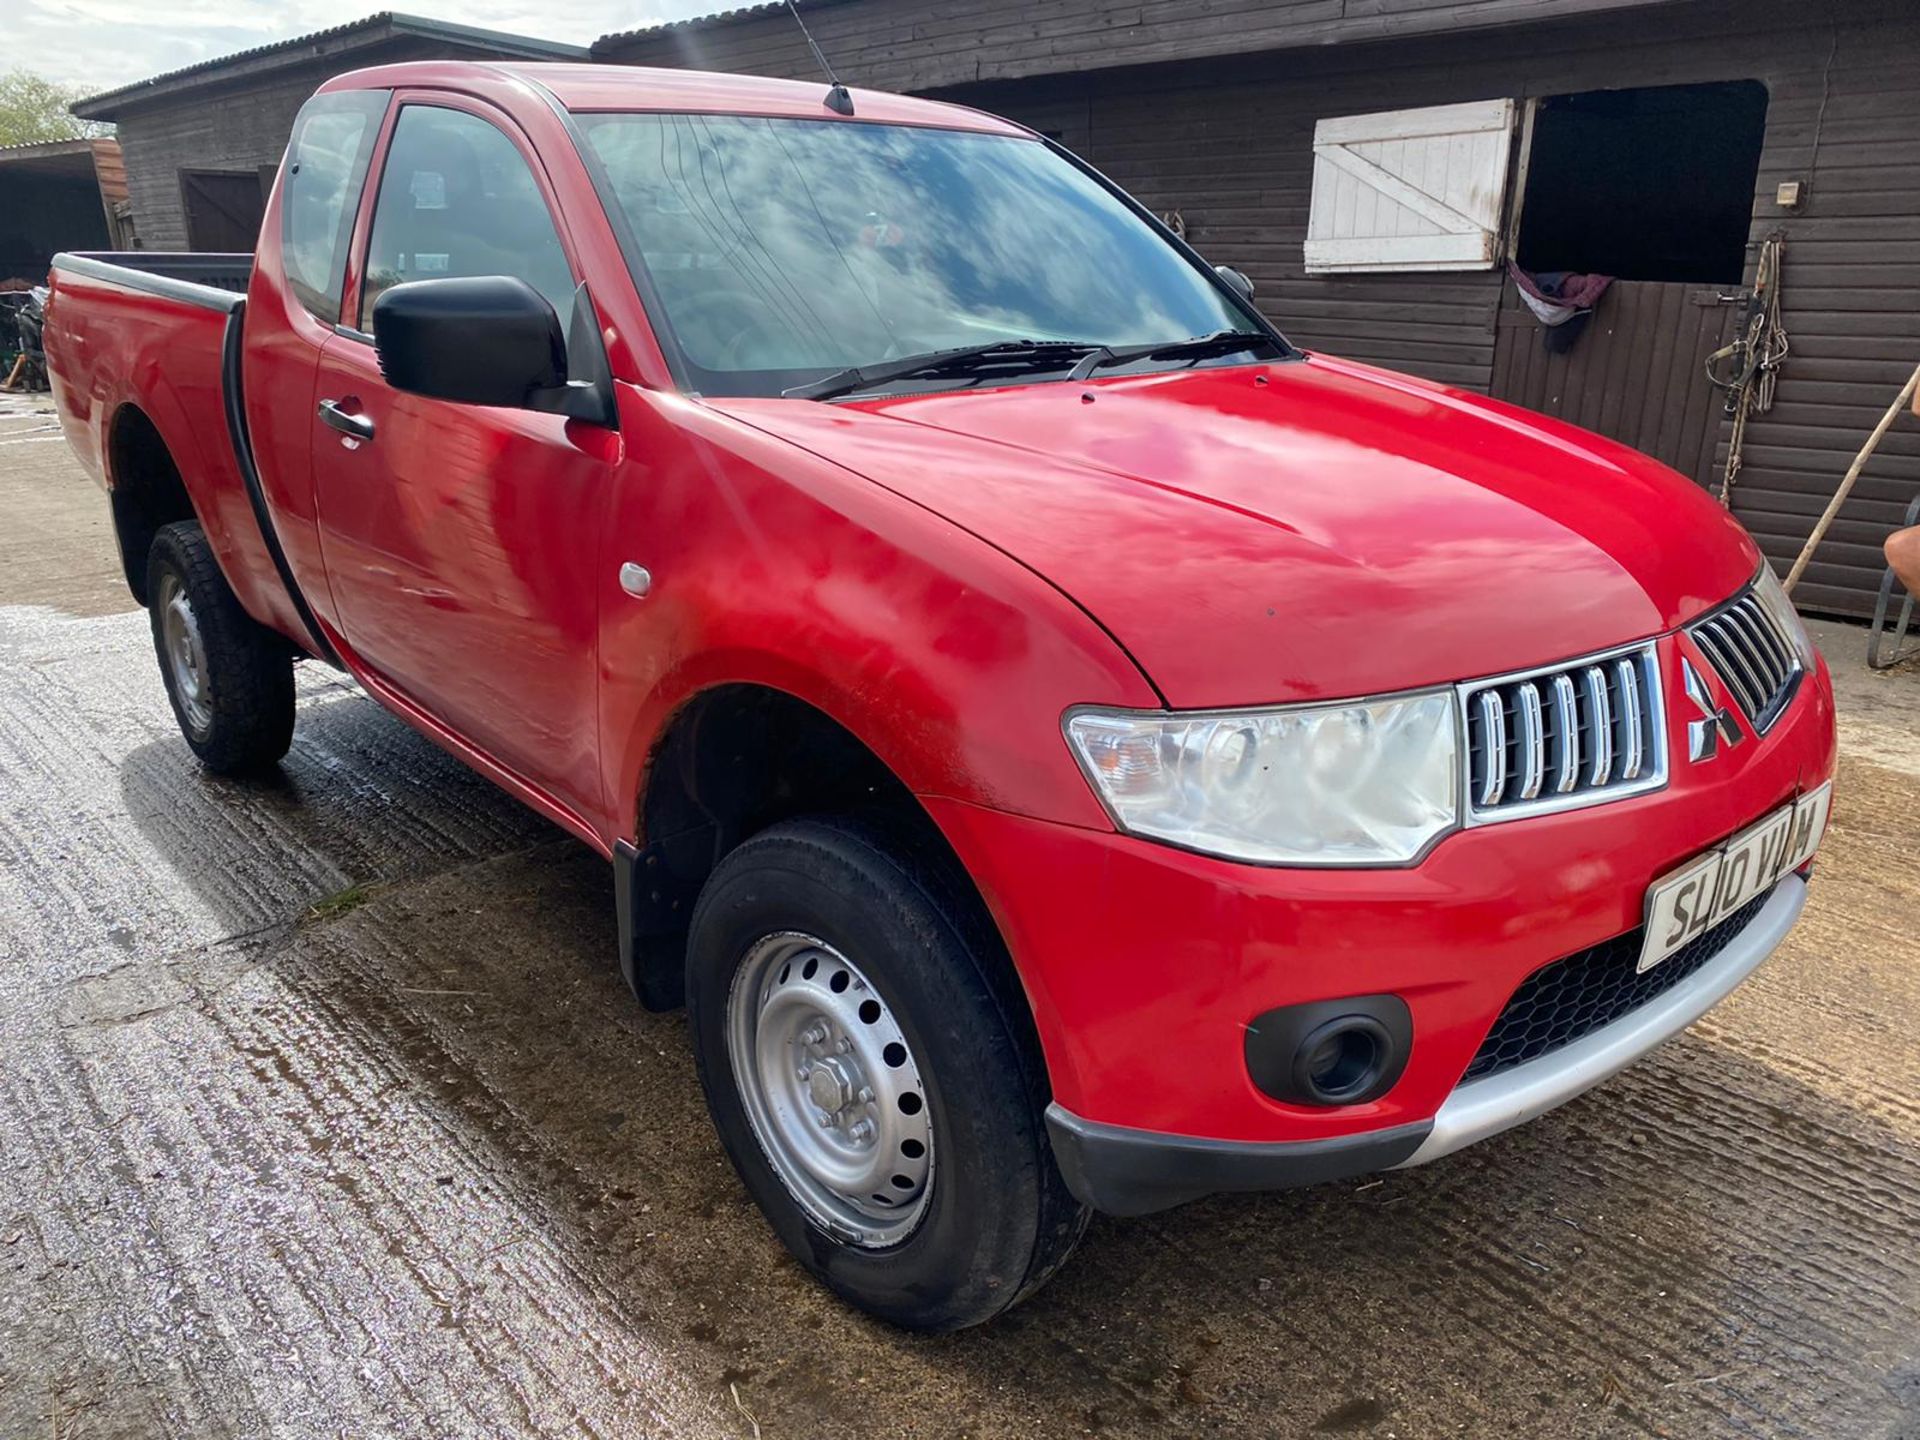 UNRESERVED 2010 MITSUBISHI L 200 4 WORK CLUB CAB4X4 PICK UP.LOCATION NORTH YORKSHIRE. - Image 5 of 5